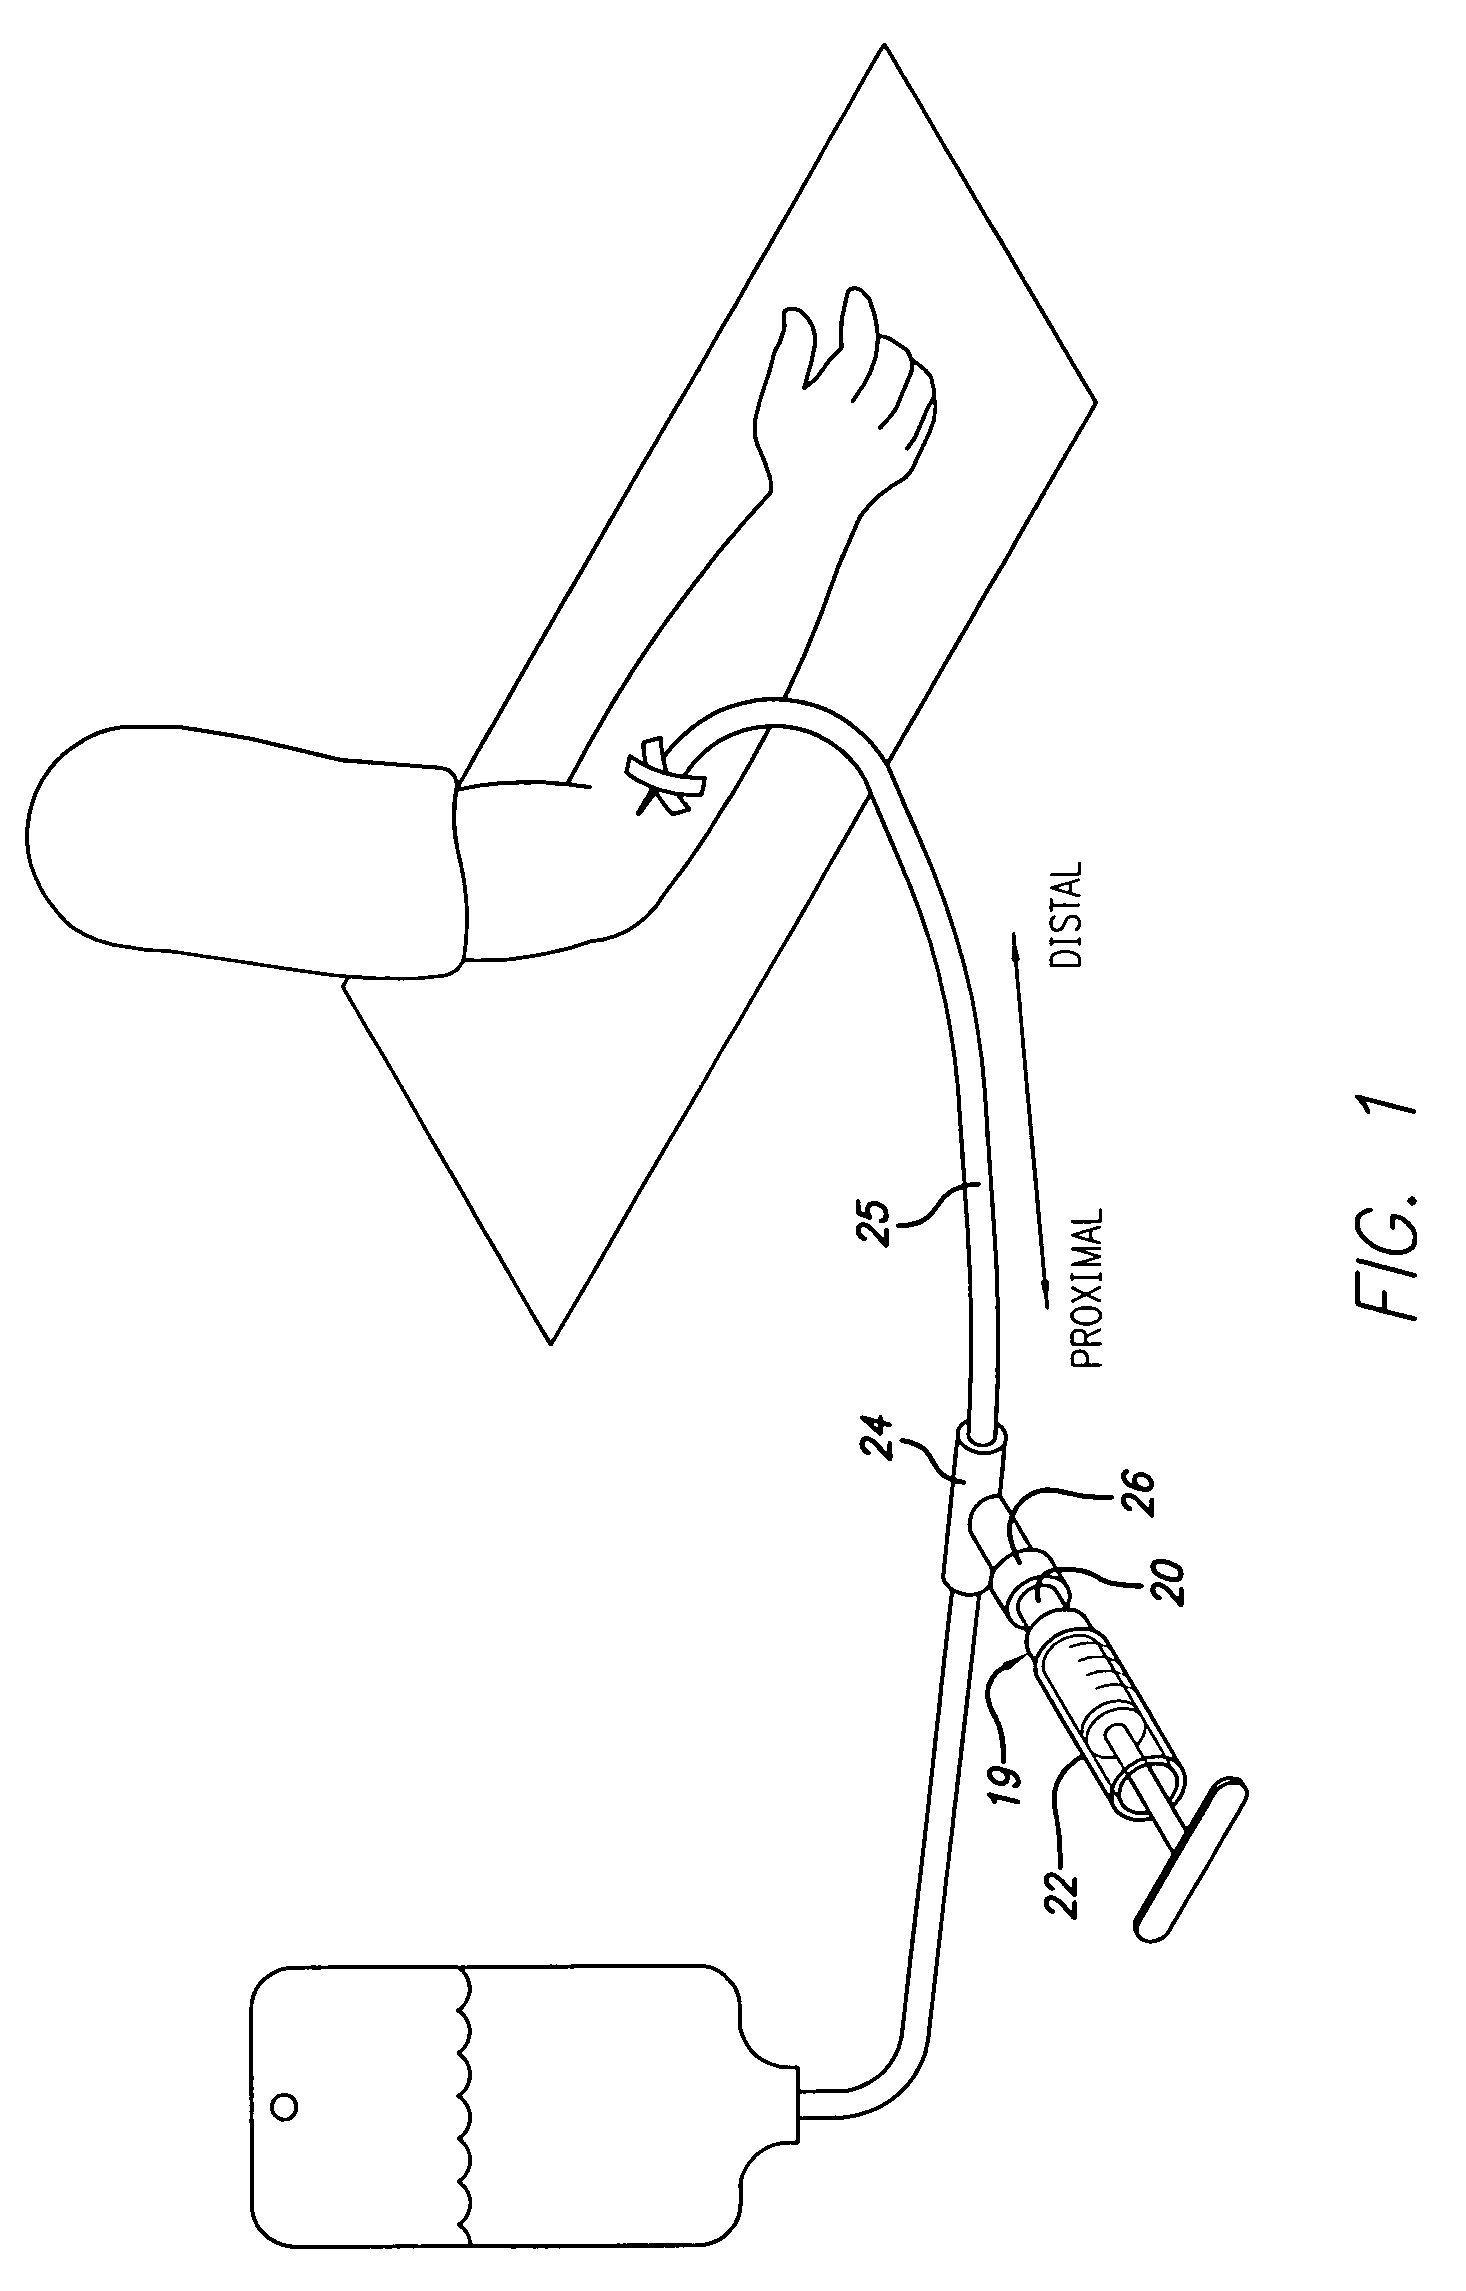 Self-sealing male Luer connector with biased valve plug